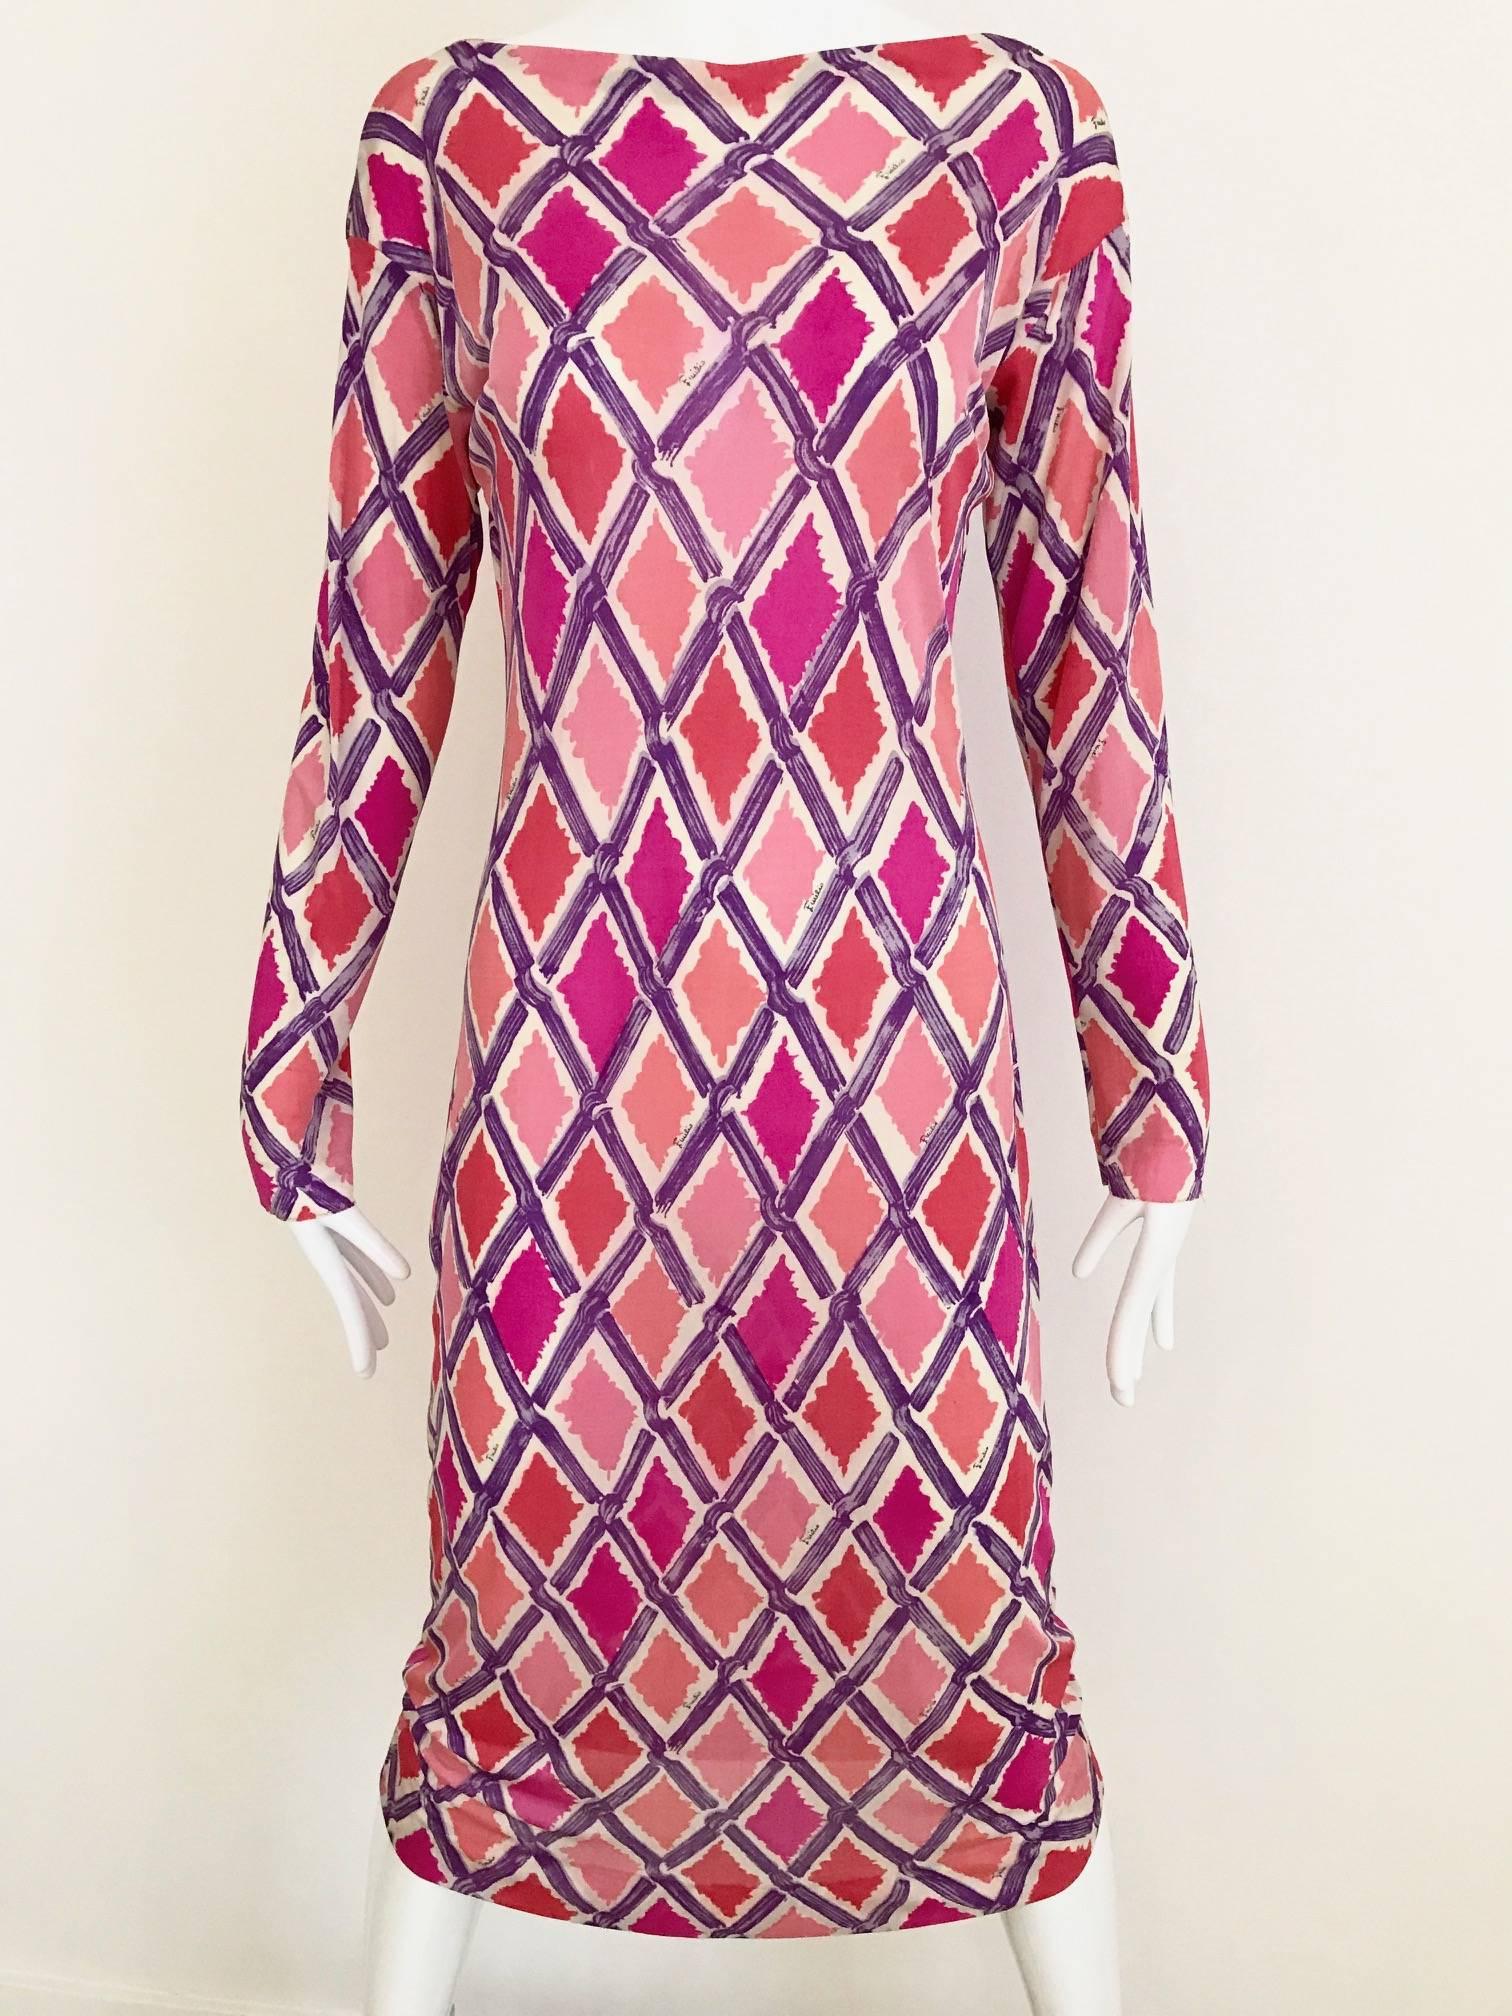 Vintage 1960s PUCCI Geometric Diamond Shape Print soft silk Jersey Dress vibrant fuschia, pink, purple and coral. Slip on Dress ( no zipper) 
Fit Size: 2/4 Small - Medium
Bust: 32 inch to 36 inch. / Hip: 36 inch
*** small fabric has been cut inside